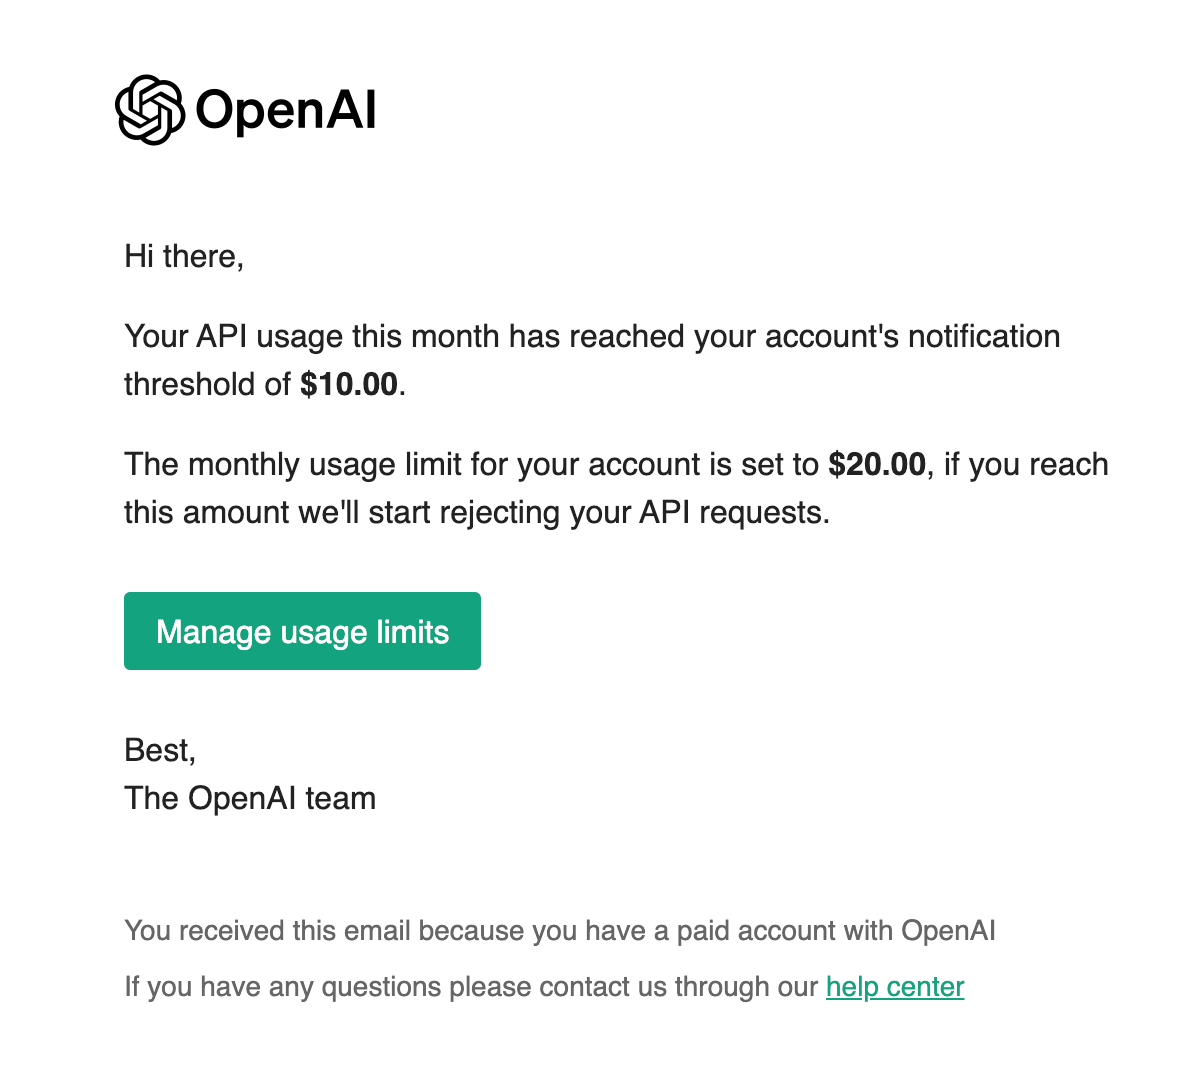 Email from OpenAI alerting the API usage has reached $10.00 with a limit of $20.00, including a "Manage usage limits" button and contact details through a help center link.